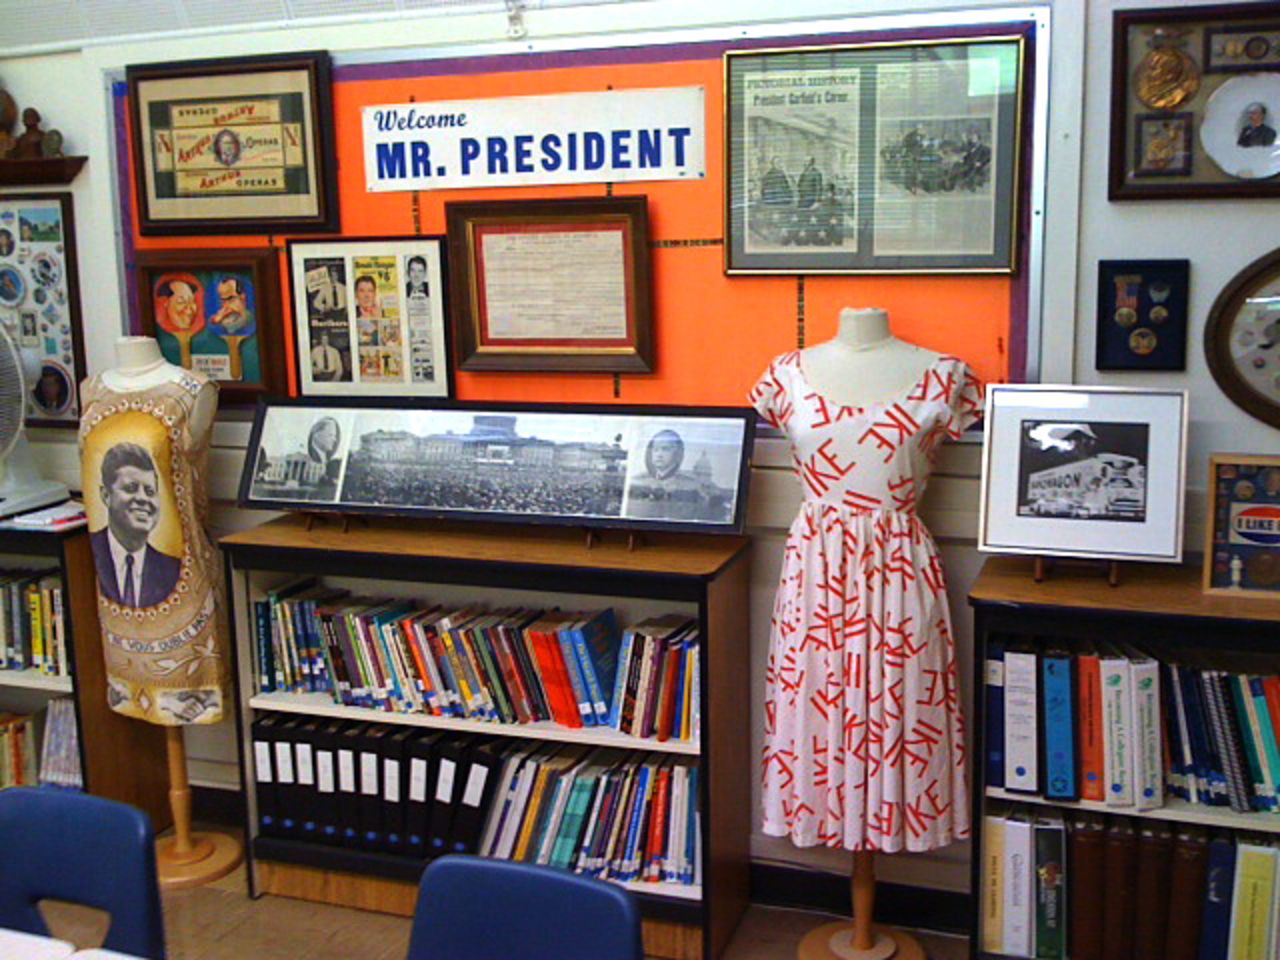 At Clairemont High School, the Museum of the American Presidency now has more than 40,000 items representing all 44 presidents. Part of the collection is on display in the school's library annex.